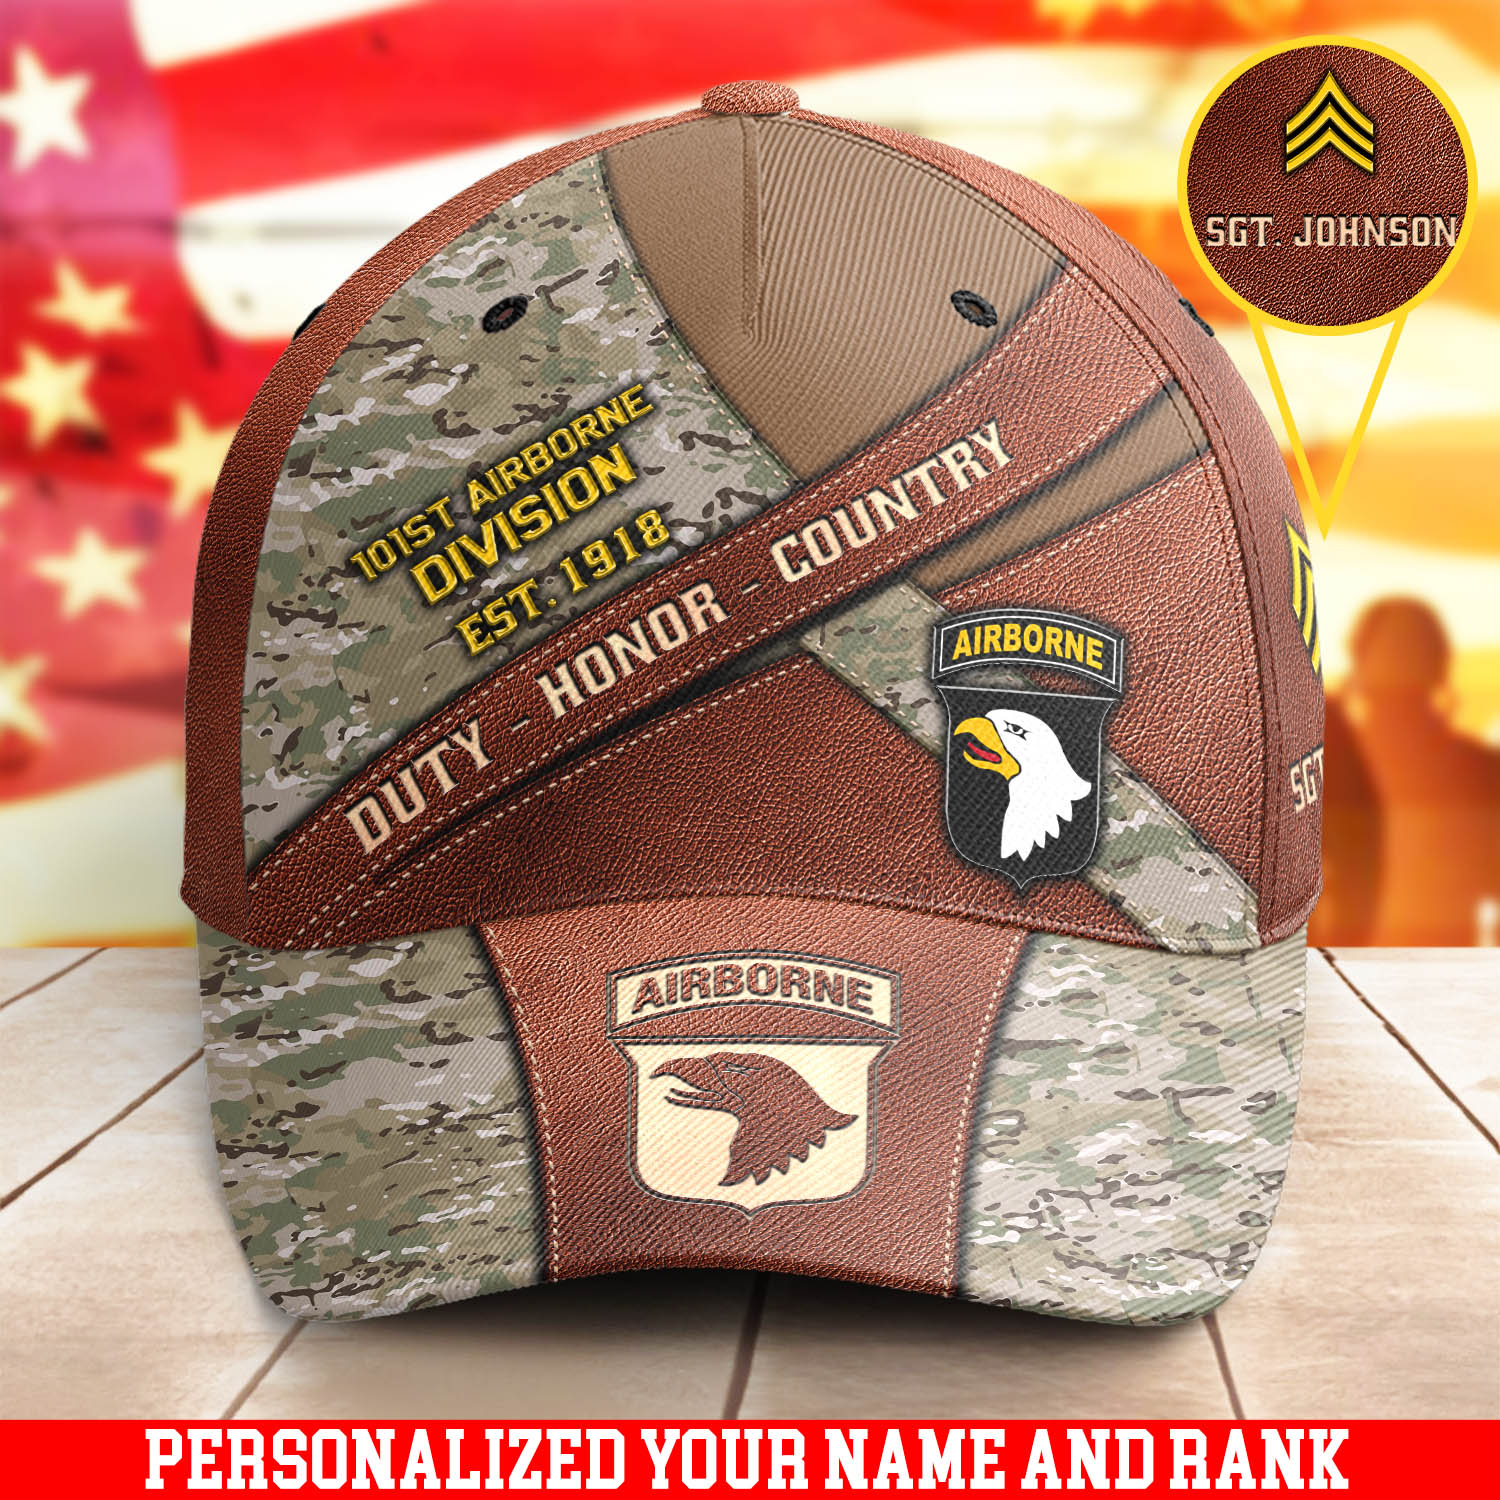 101st Airborne Division Cap New Version Personalized Your Name And Rank, Camouflage Cap For US Military, US Military Gifts ETHY-57782